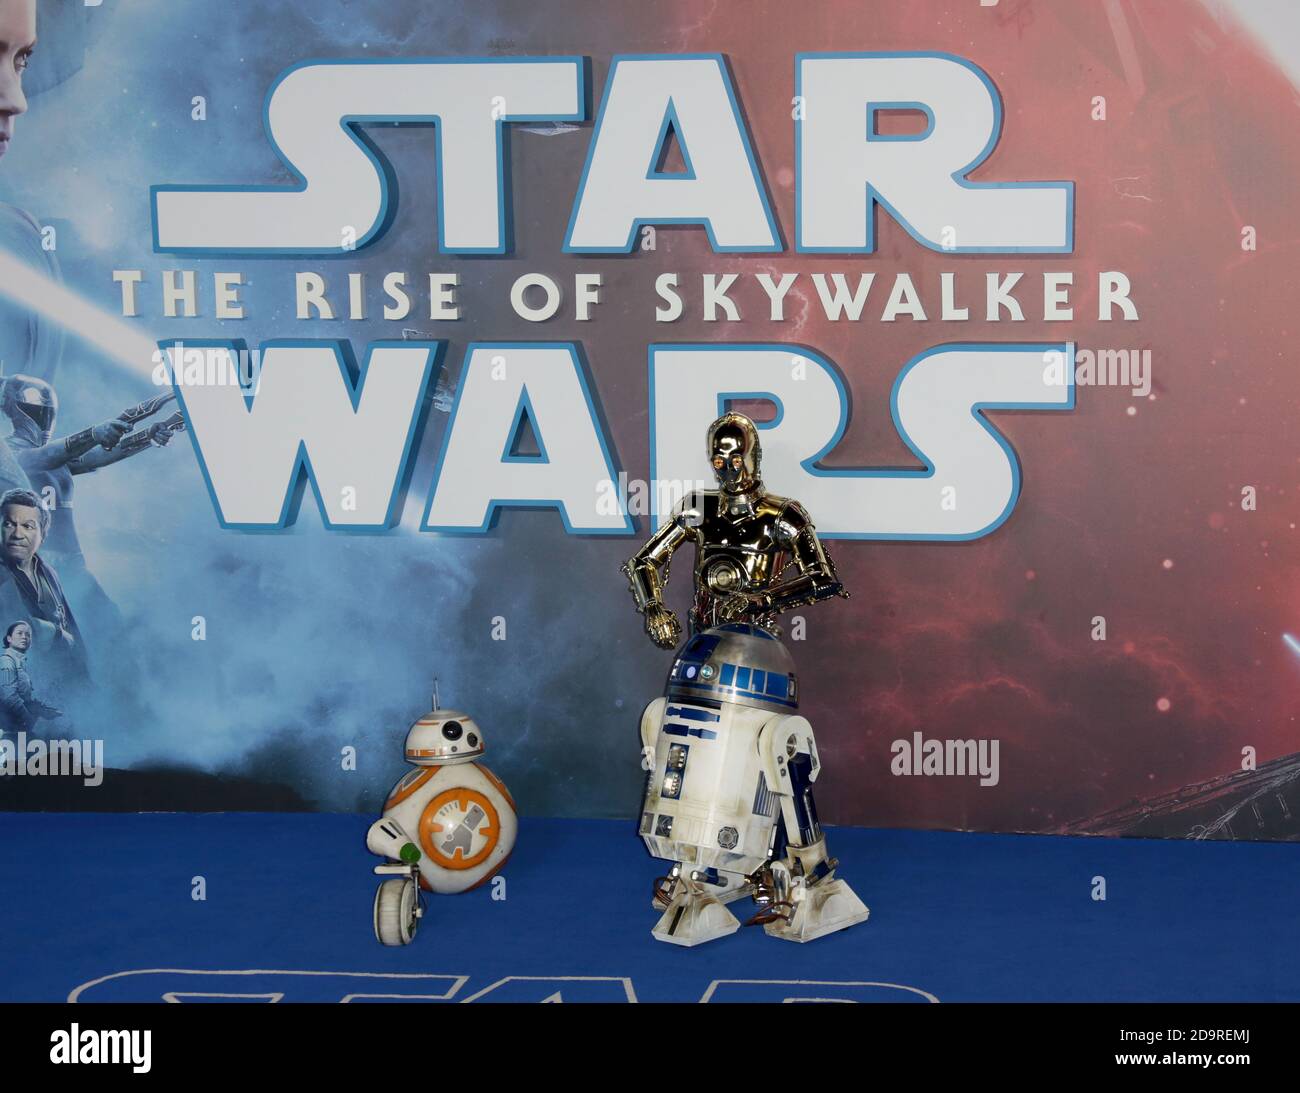 Dec 18, 2019 - London, England, UK - Star Wars: The Rise of Skywalker UK Premiere, Cineworld, Leicester Square - Red Carpet Arrivals Photo Shows: R2-D Stock Photo